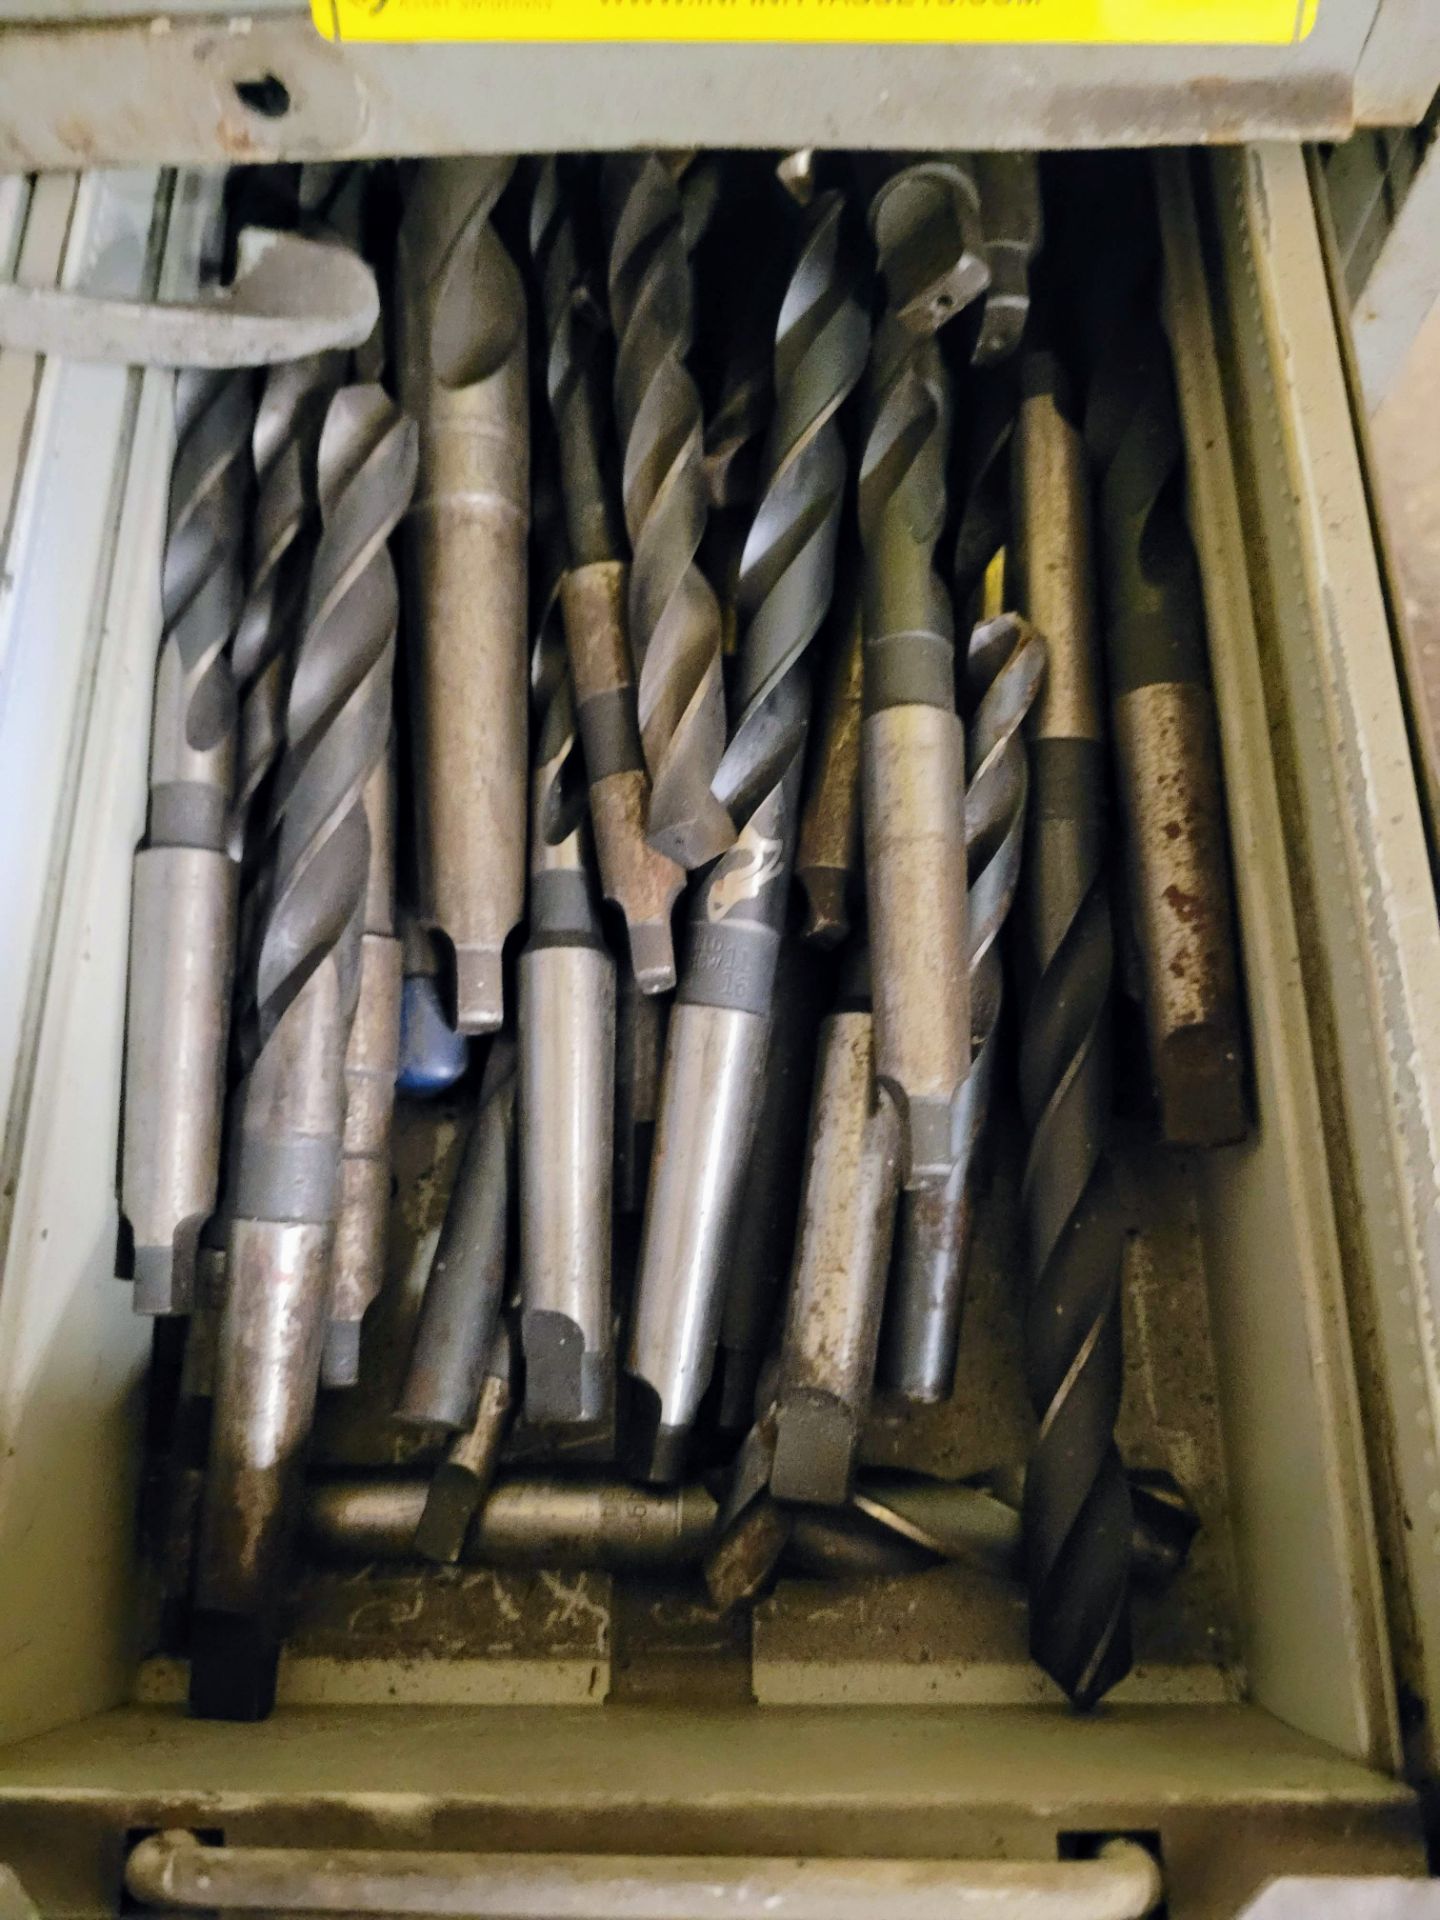 CONTENTS OF 2-SECTION DRAWER INCLUDING DRILL BITS, ETC. (NO DRAWER)